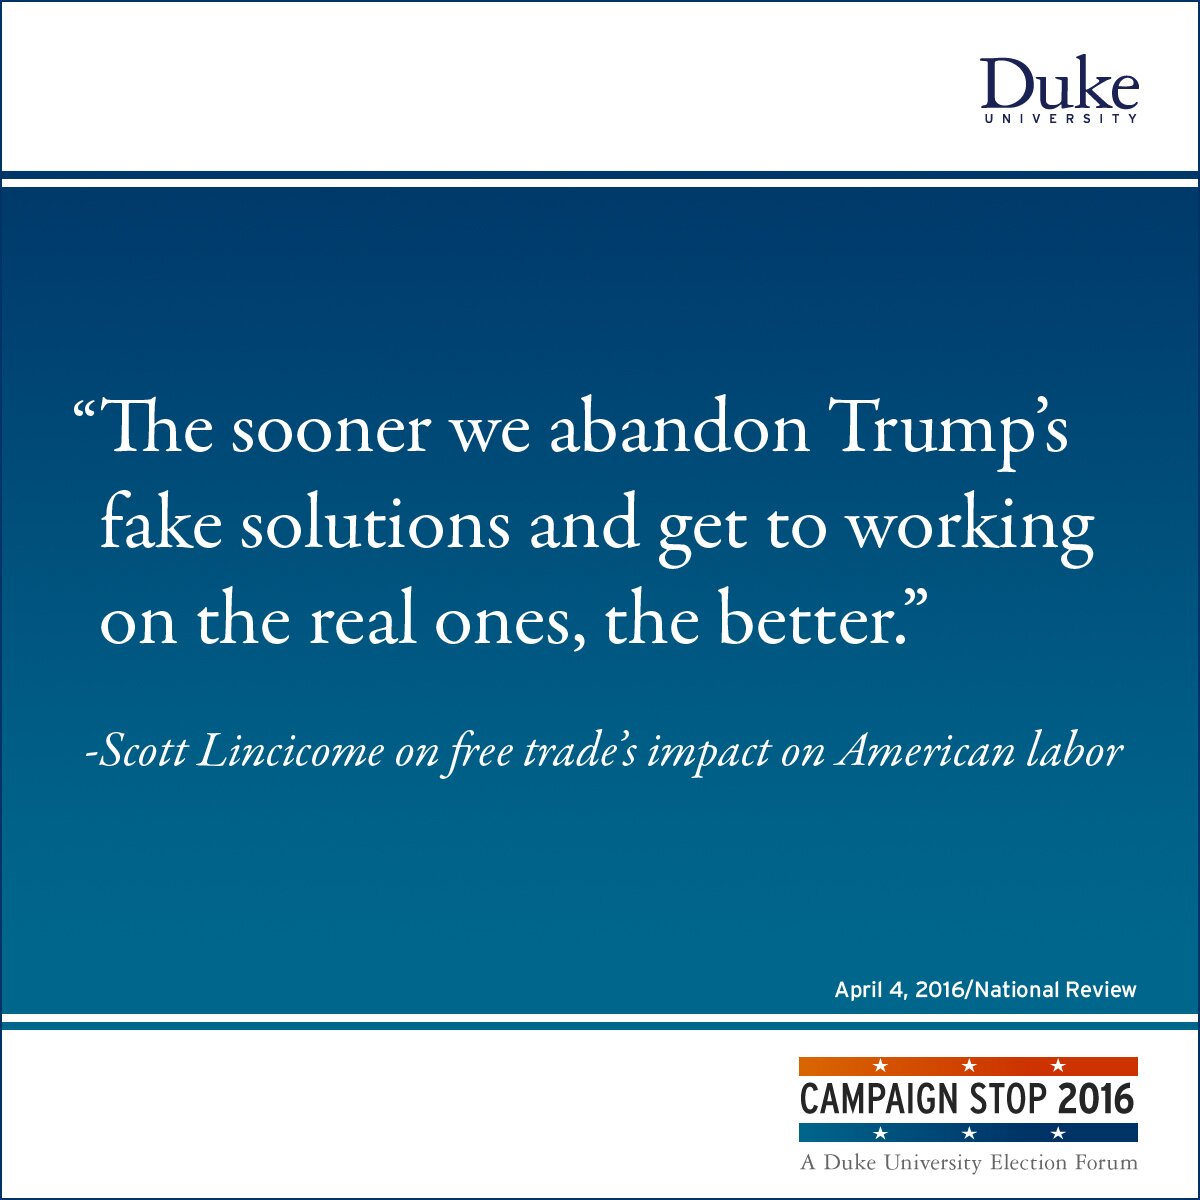 “The sooner we abandon Trump’s fake solutions and get to working on the real ones, the better.” -Scott Lincicome on free trade’s impact on American labor